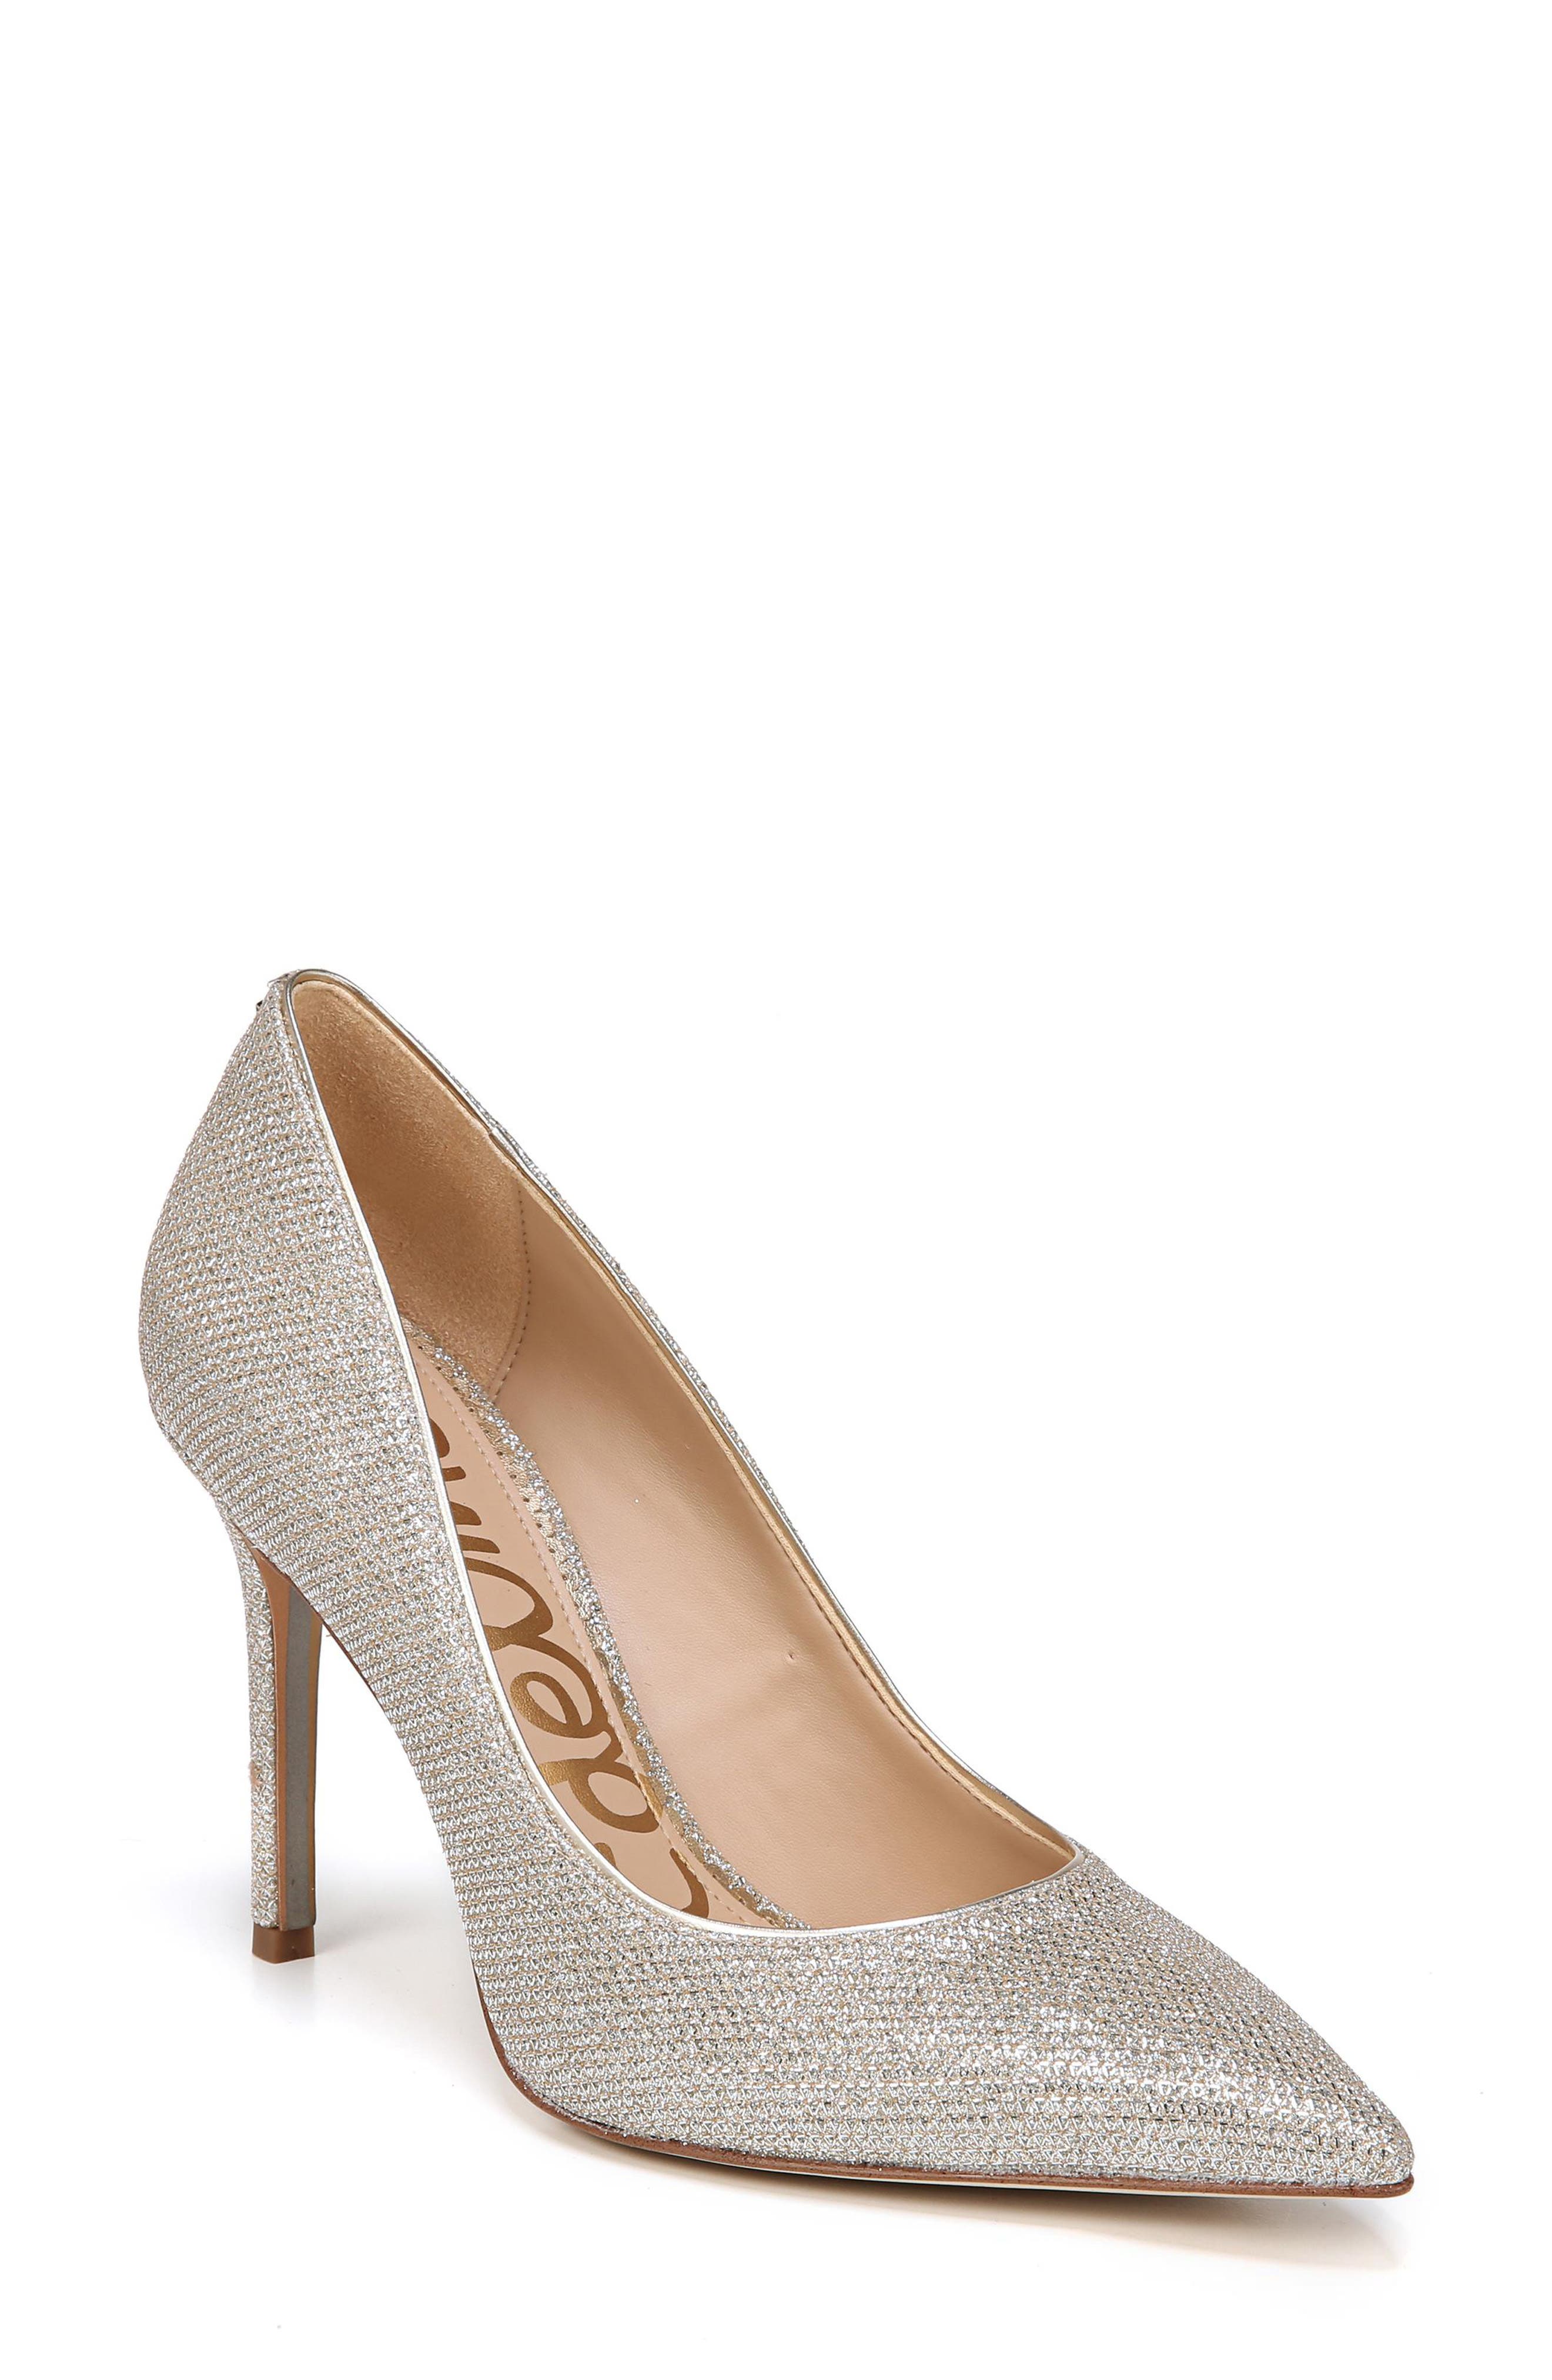 nordstrom mother of the bride shoes